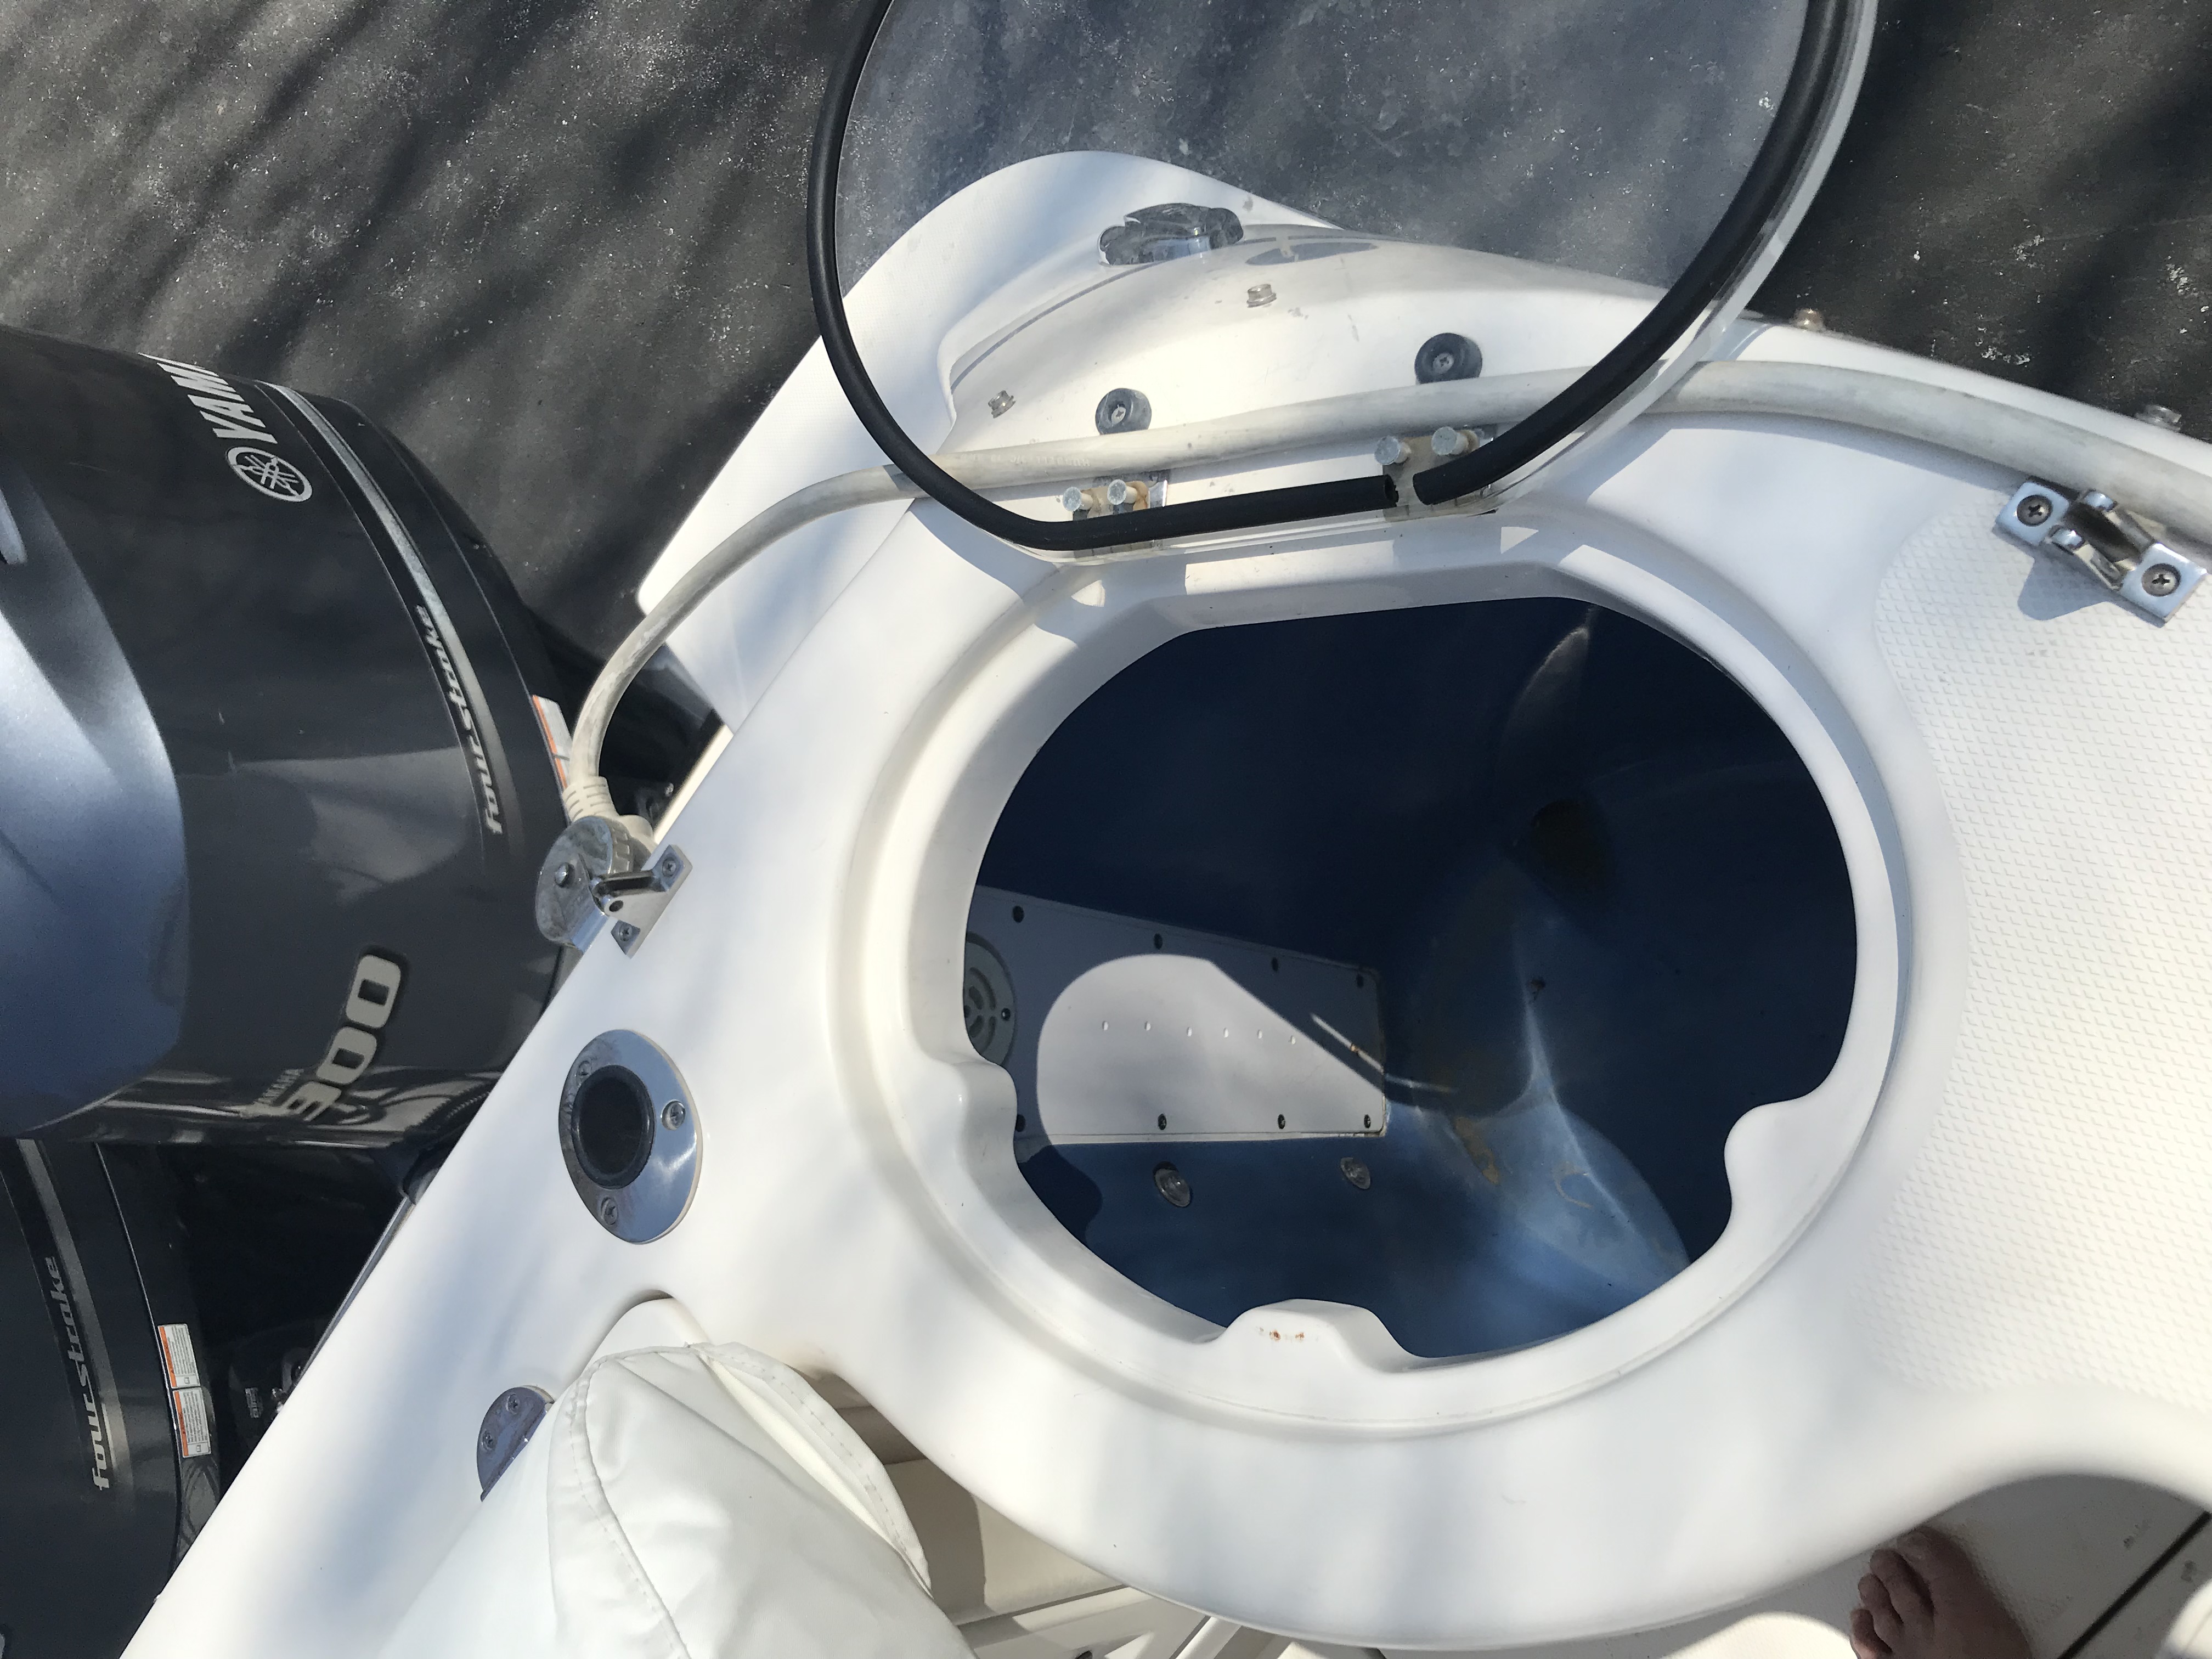 2014 Robalo R 305 wa Power boat for sale in Berlin Hts, OH - image 7 